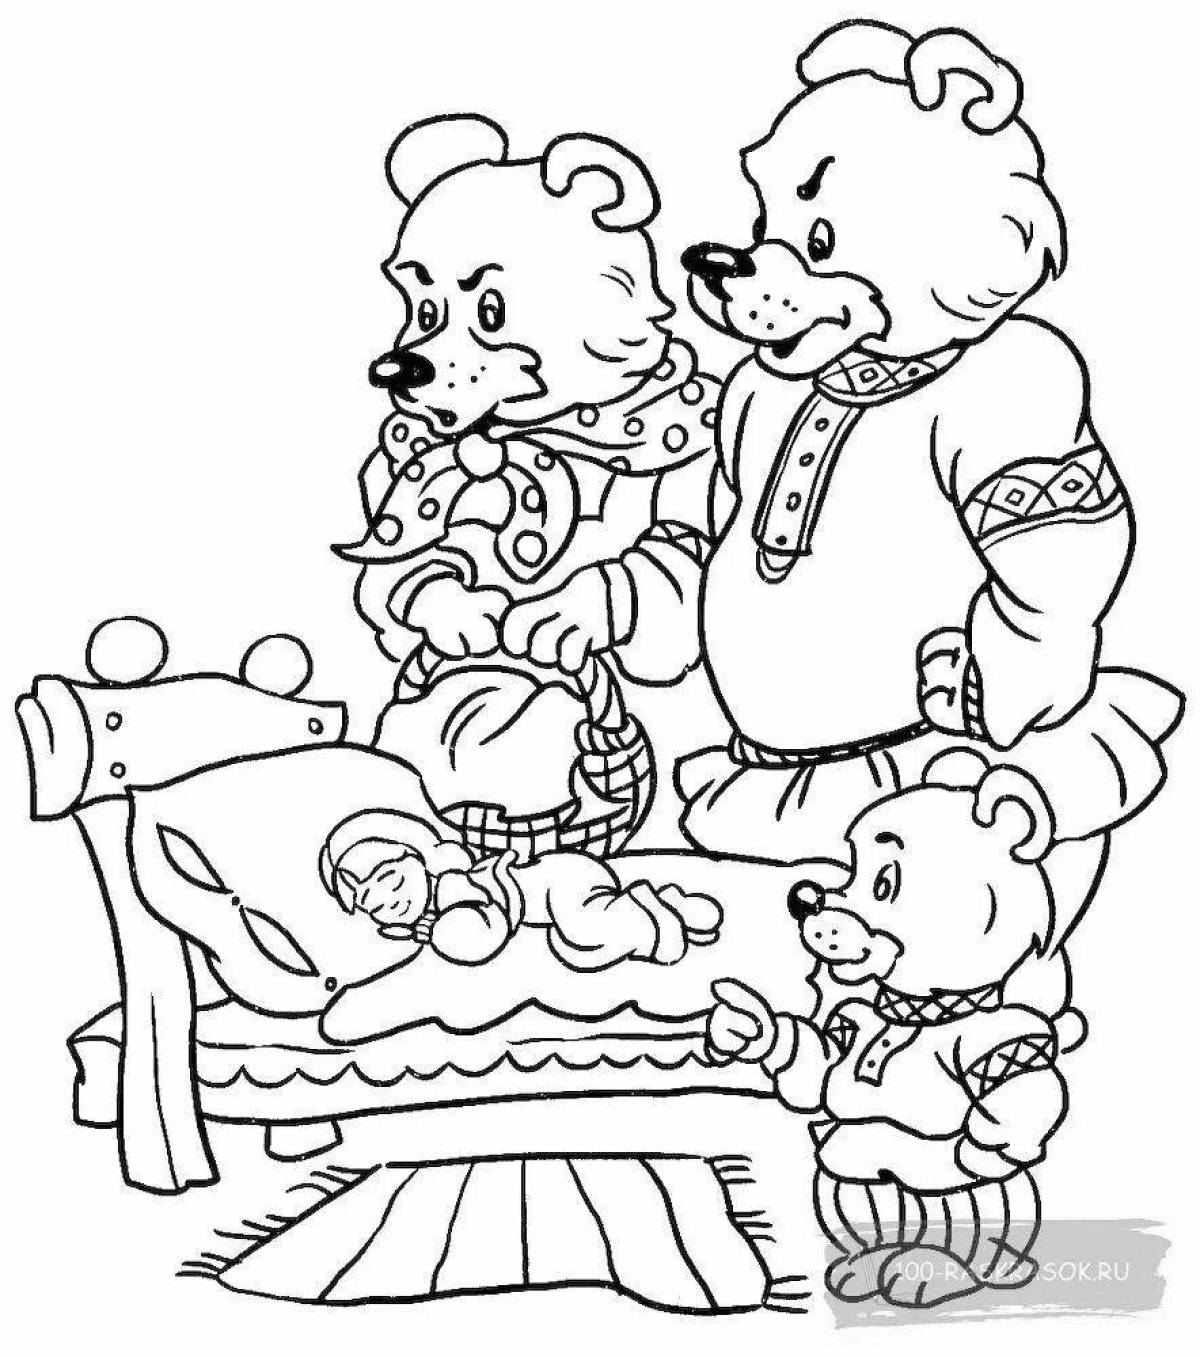 Three bears coloring book for kids